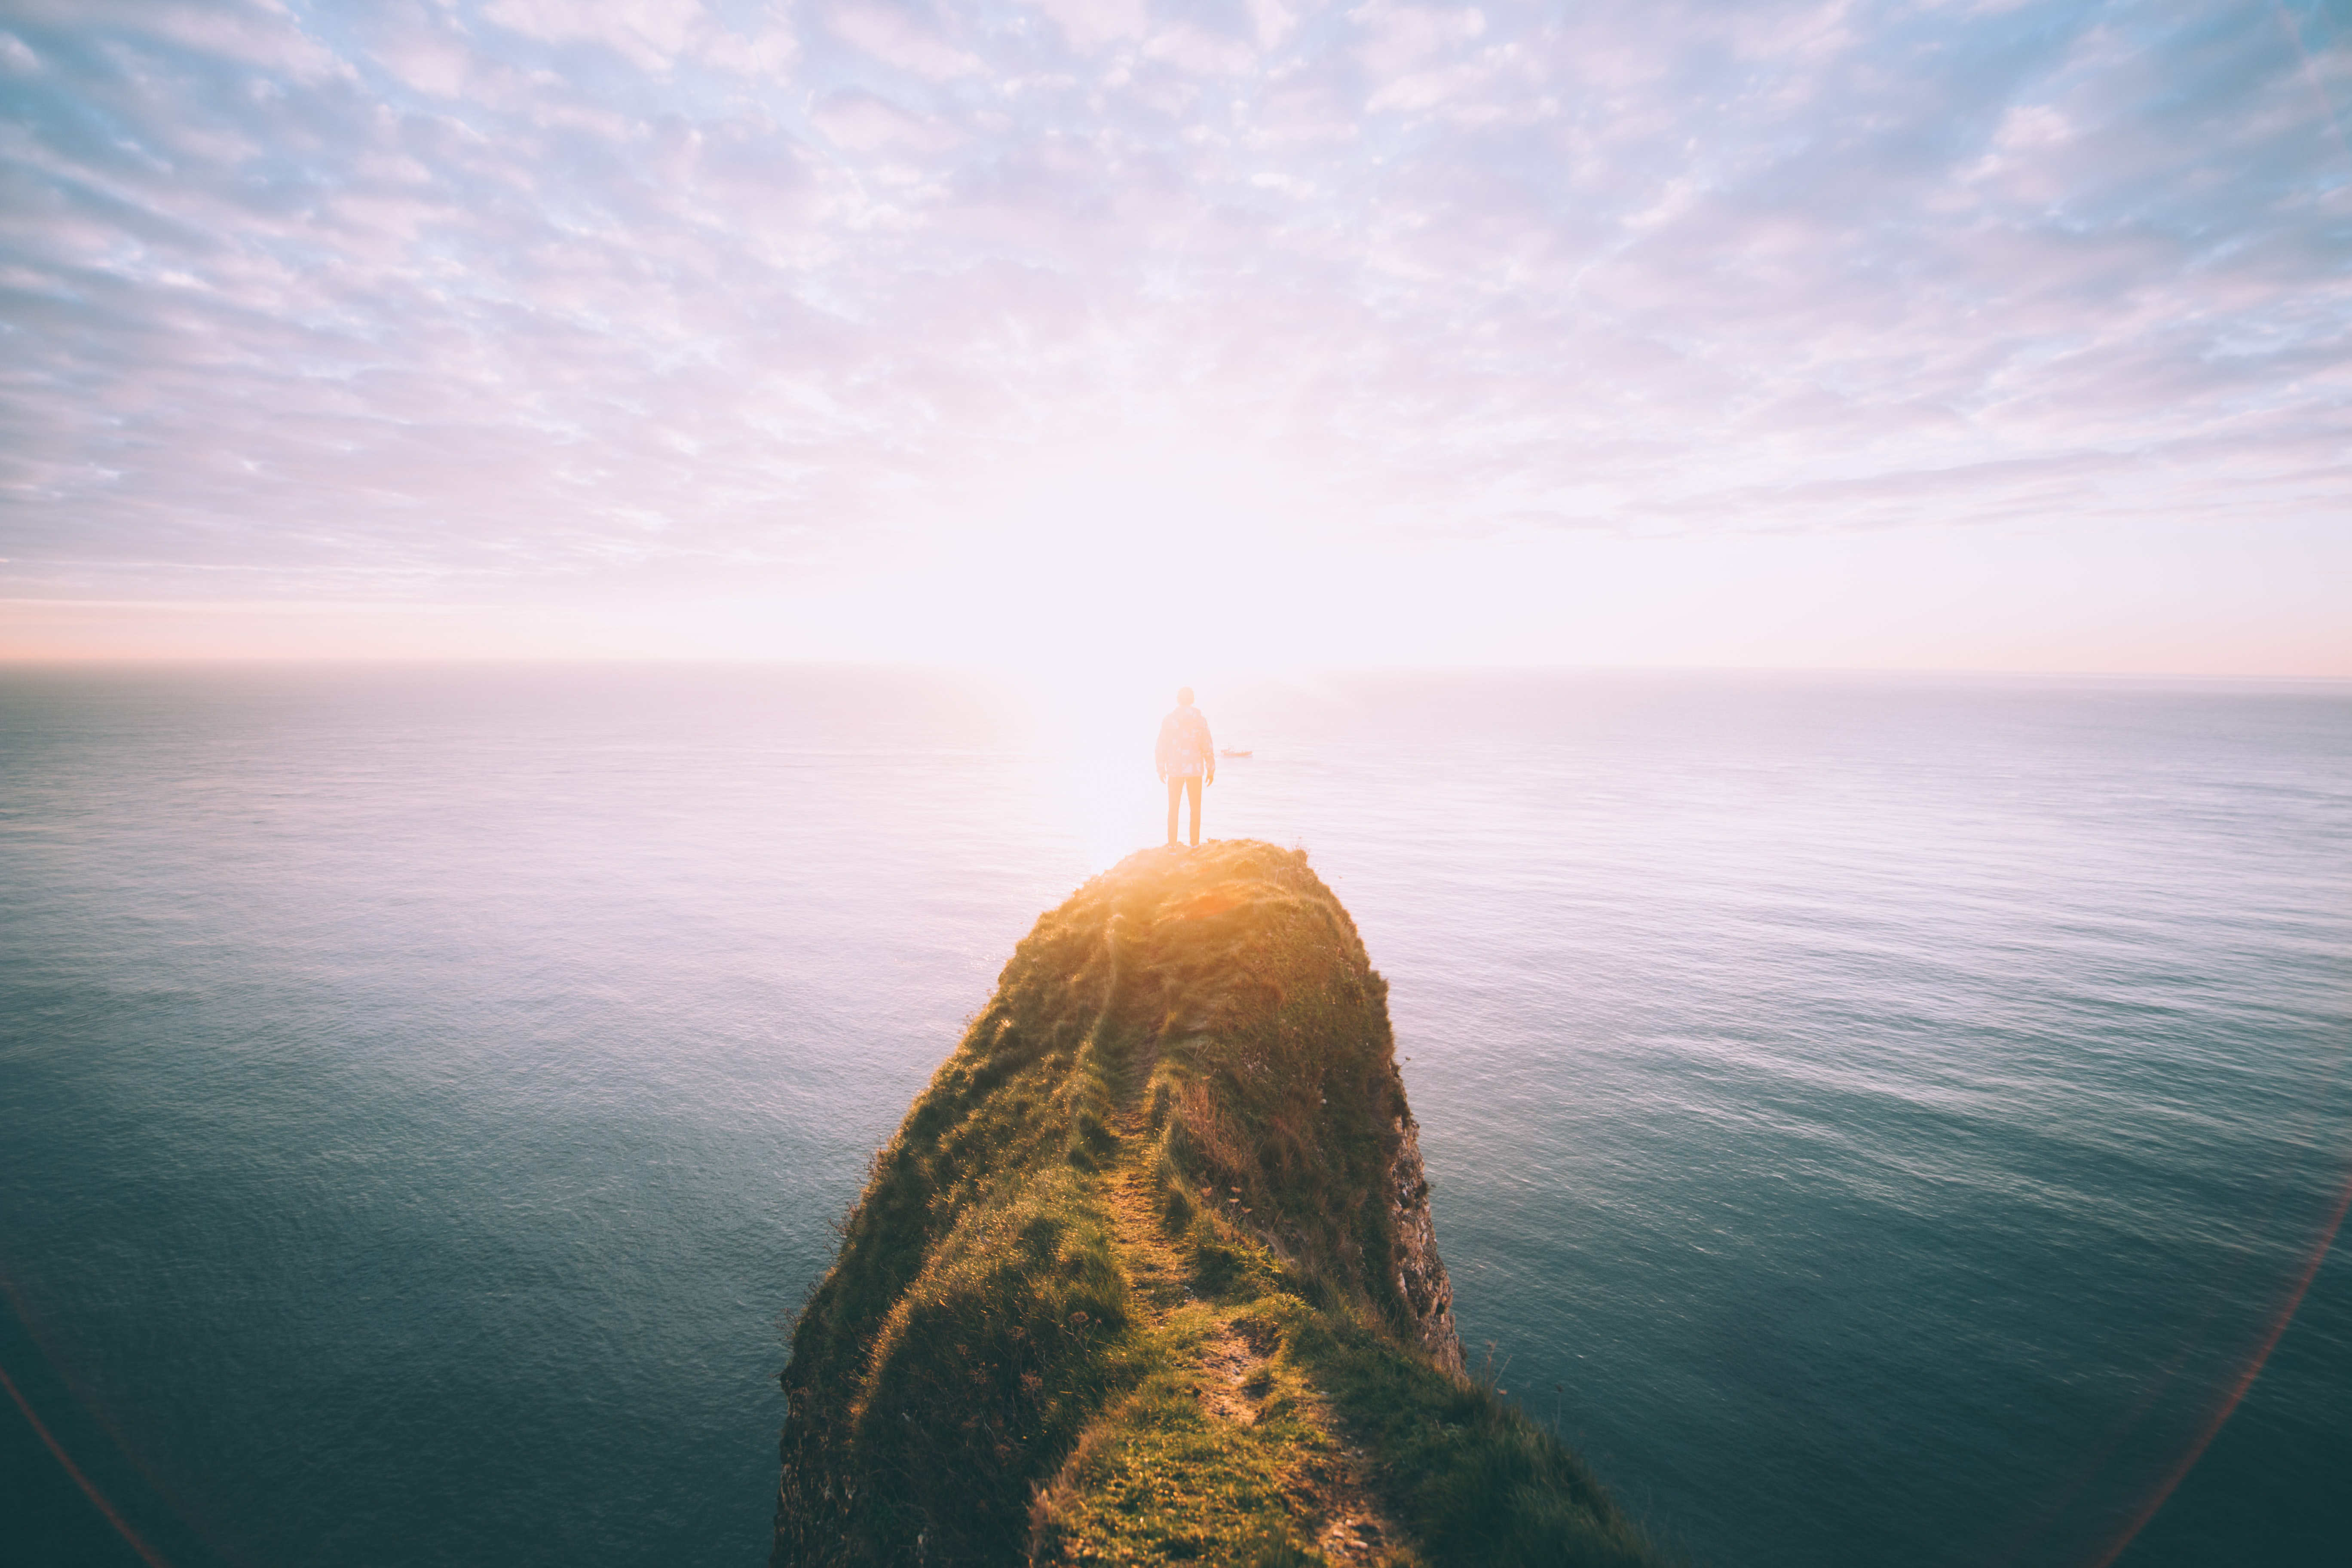 Person on top of the cliff, by Will van Wingerden on Unsplash